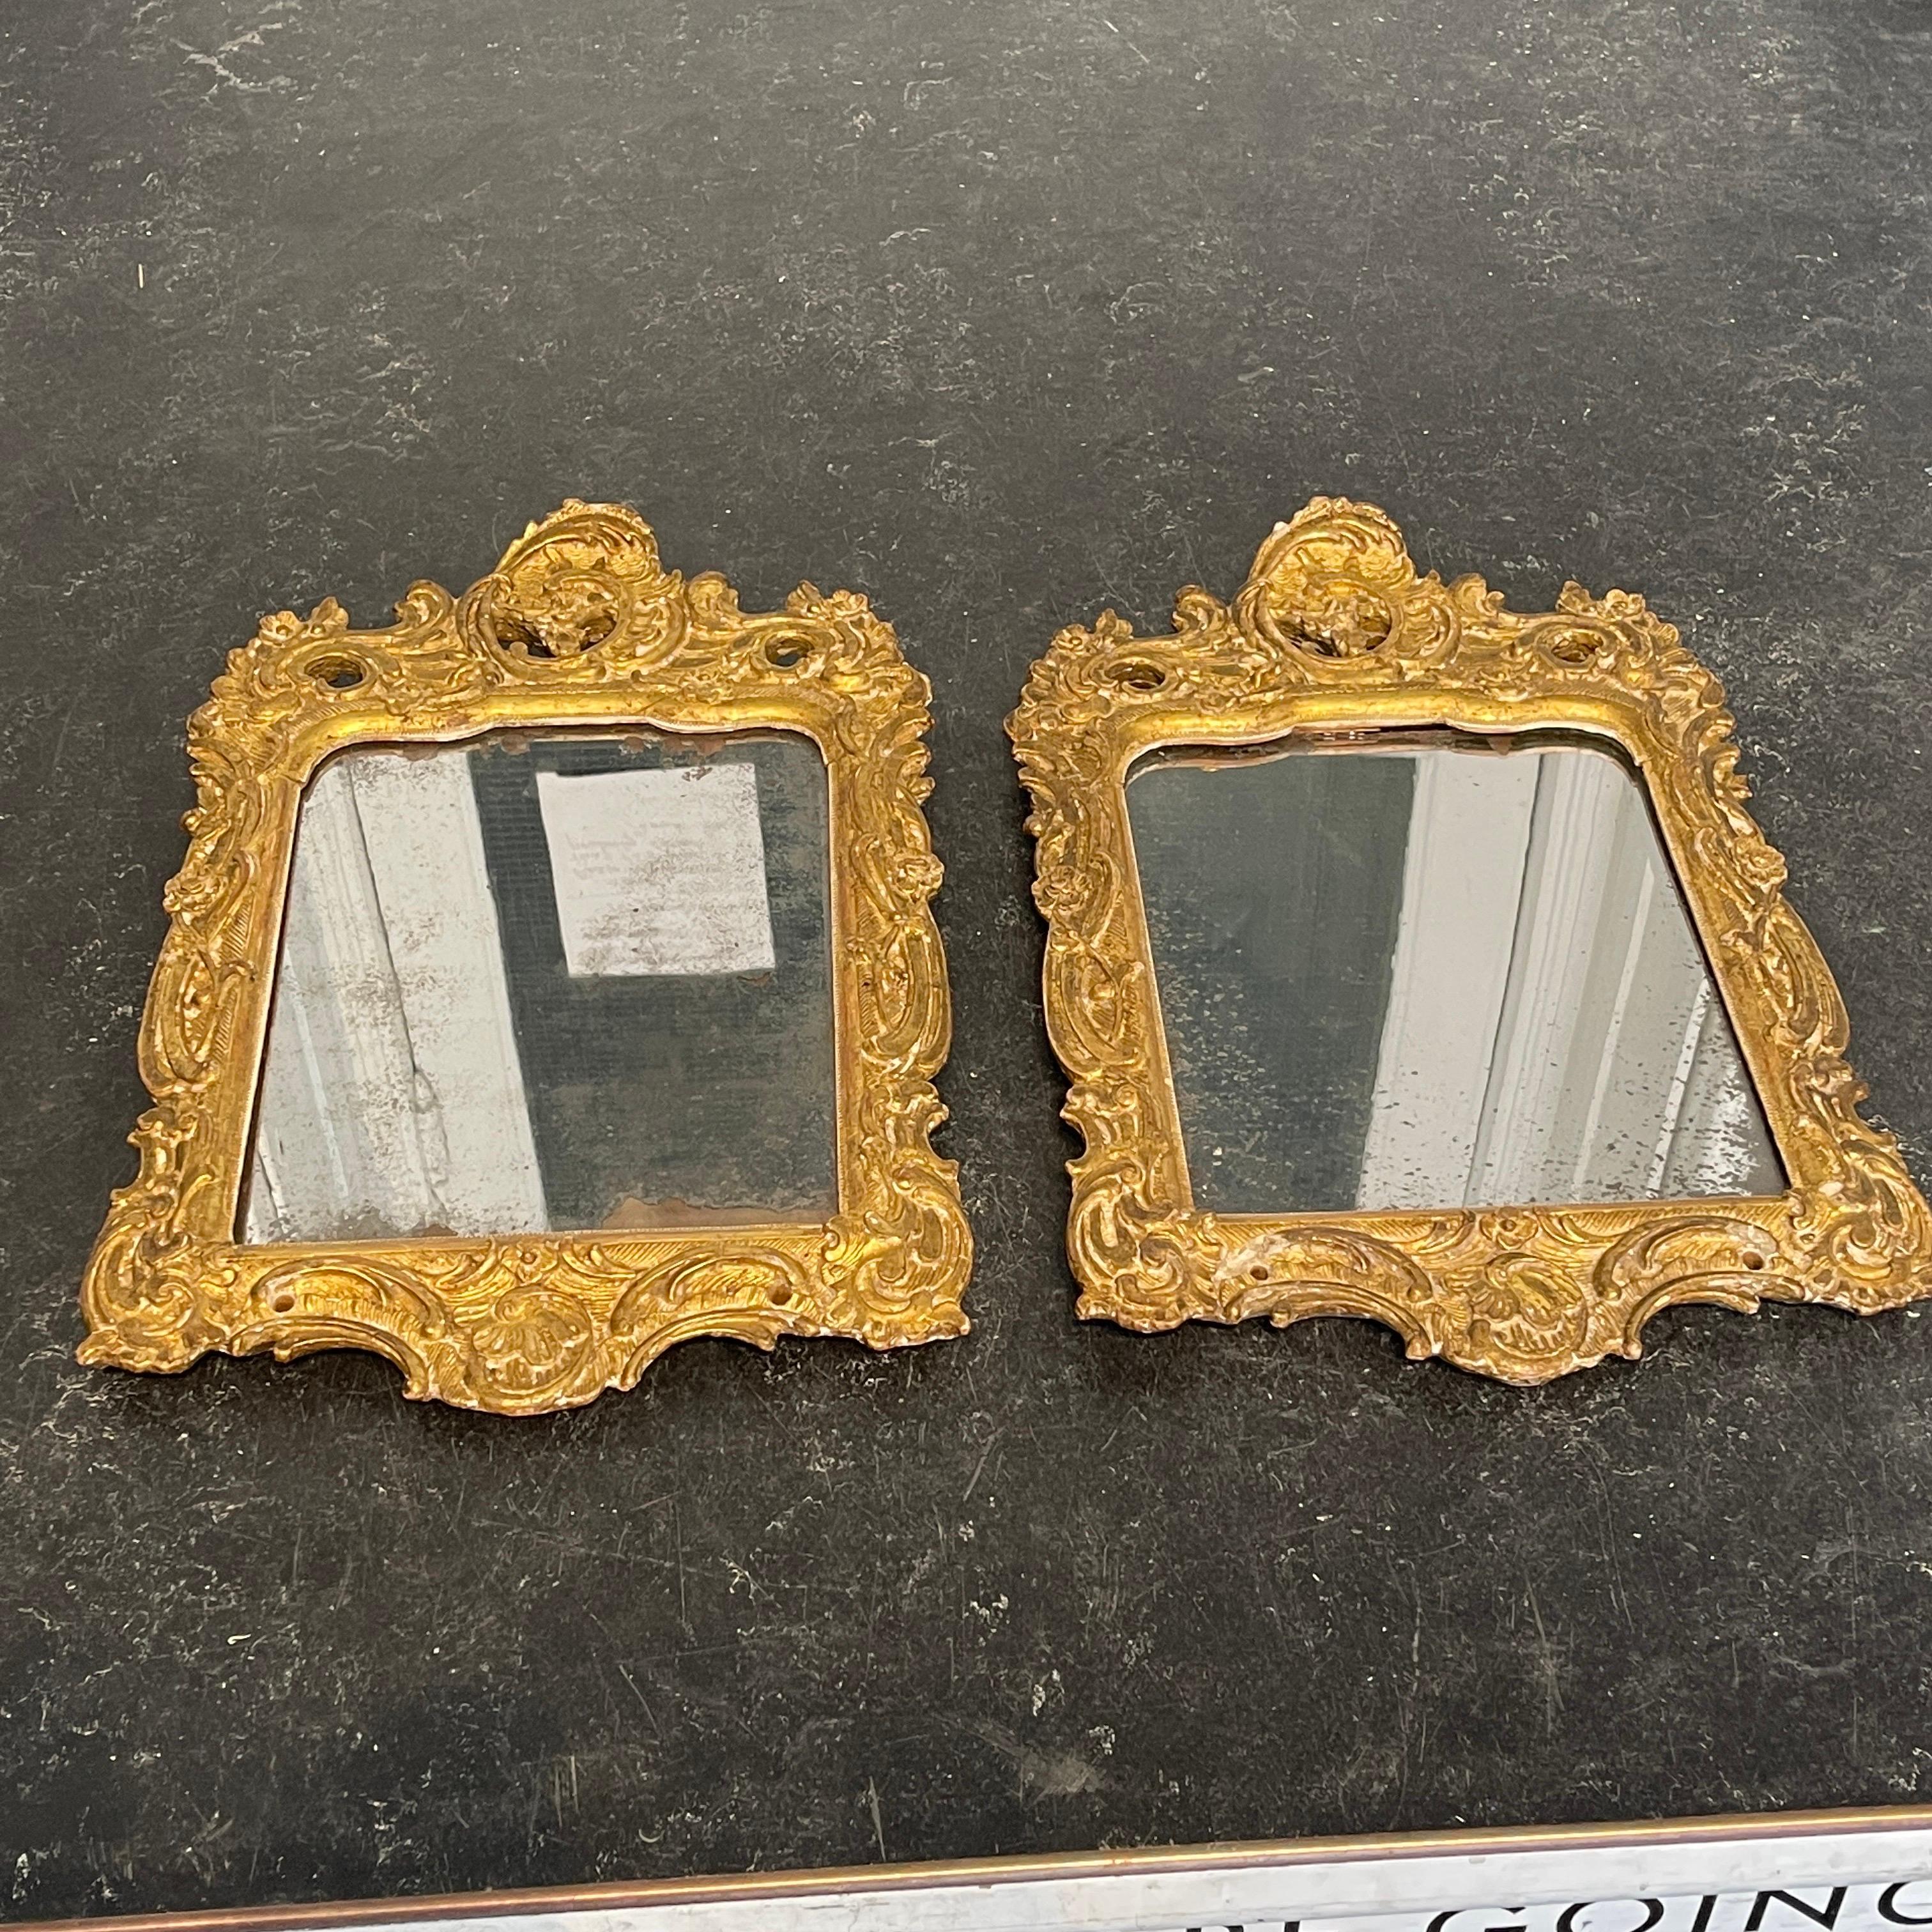 Hand-Crafted Pair of Small Gilded Rococo Wall Mirrors, Denmark circa 1780 For Sale